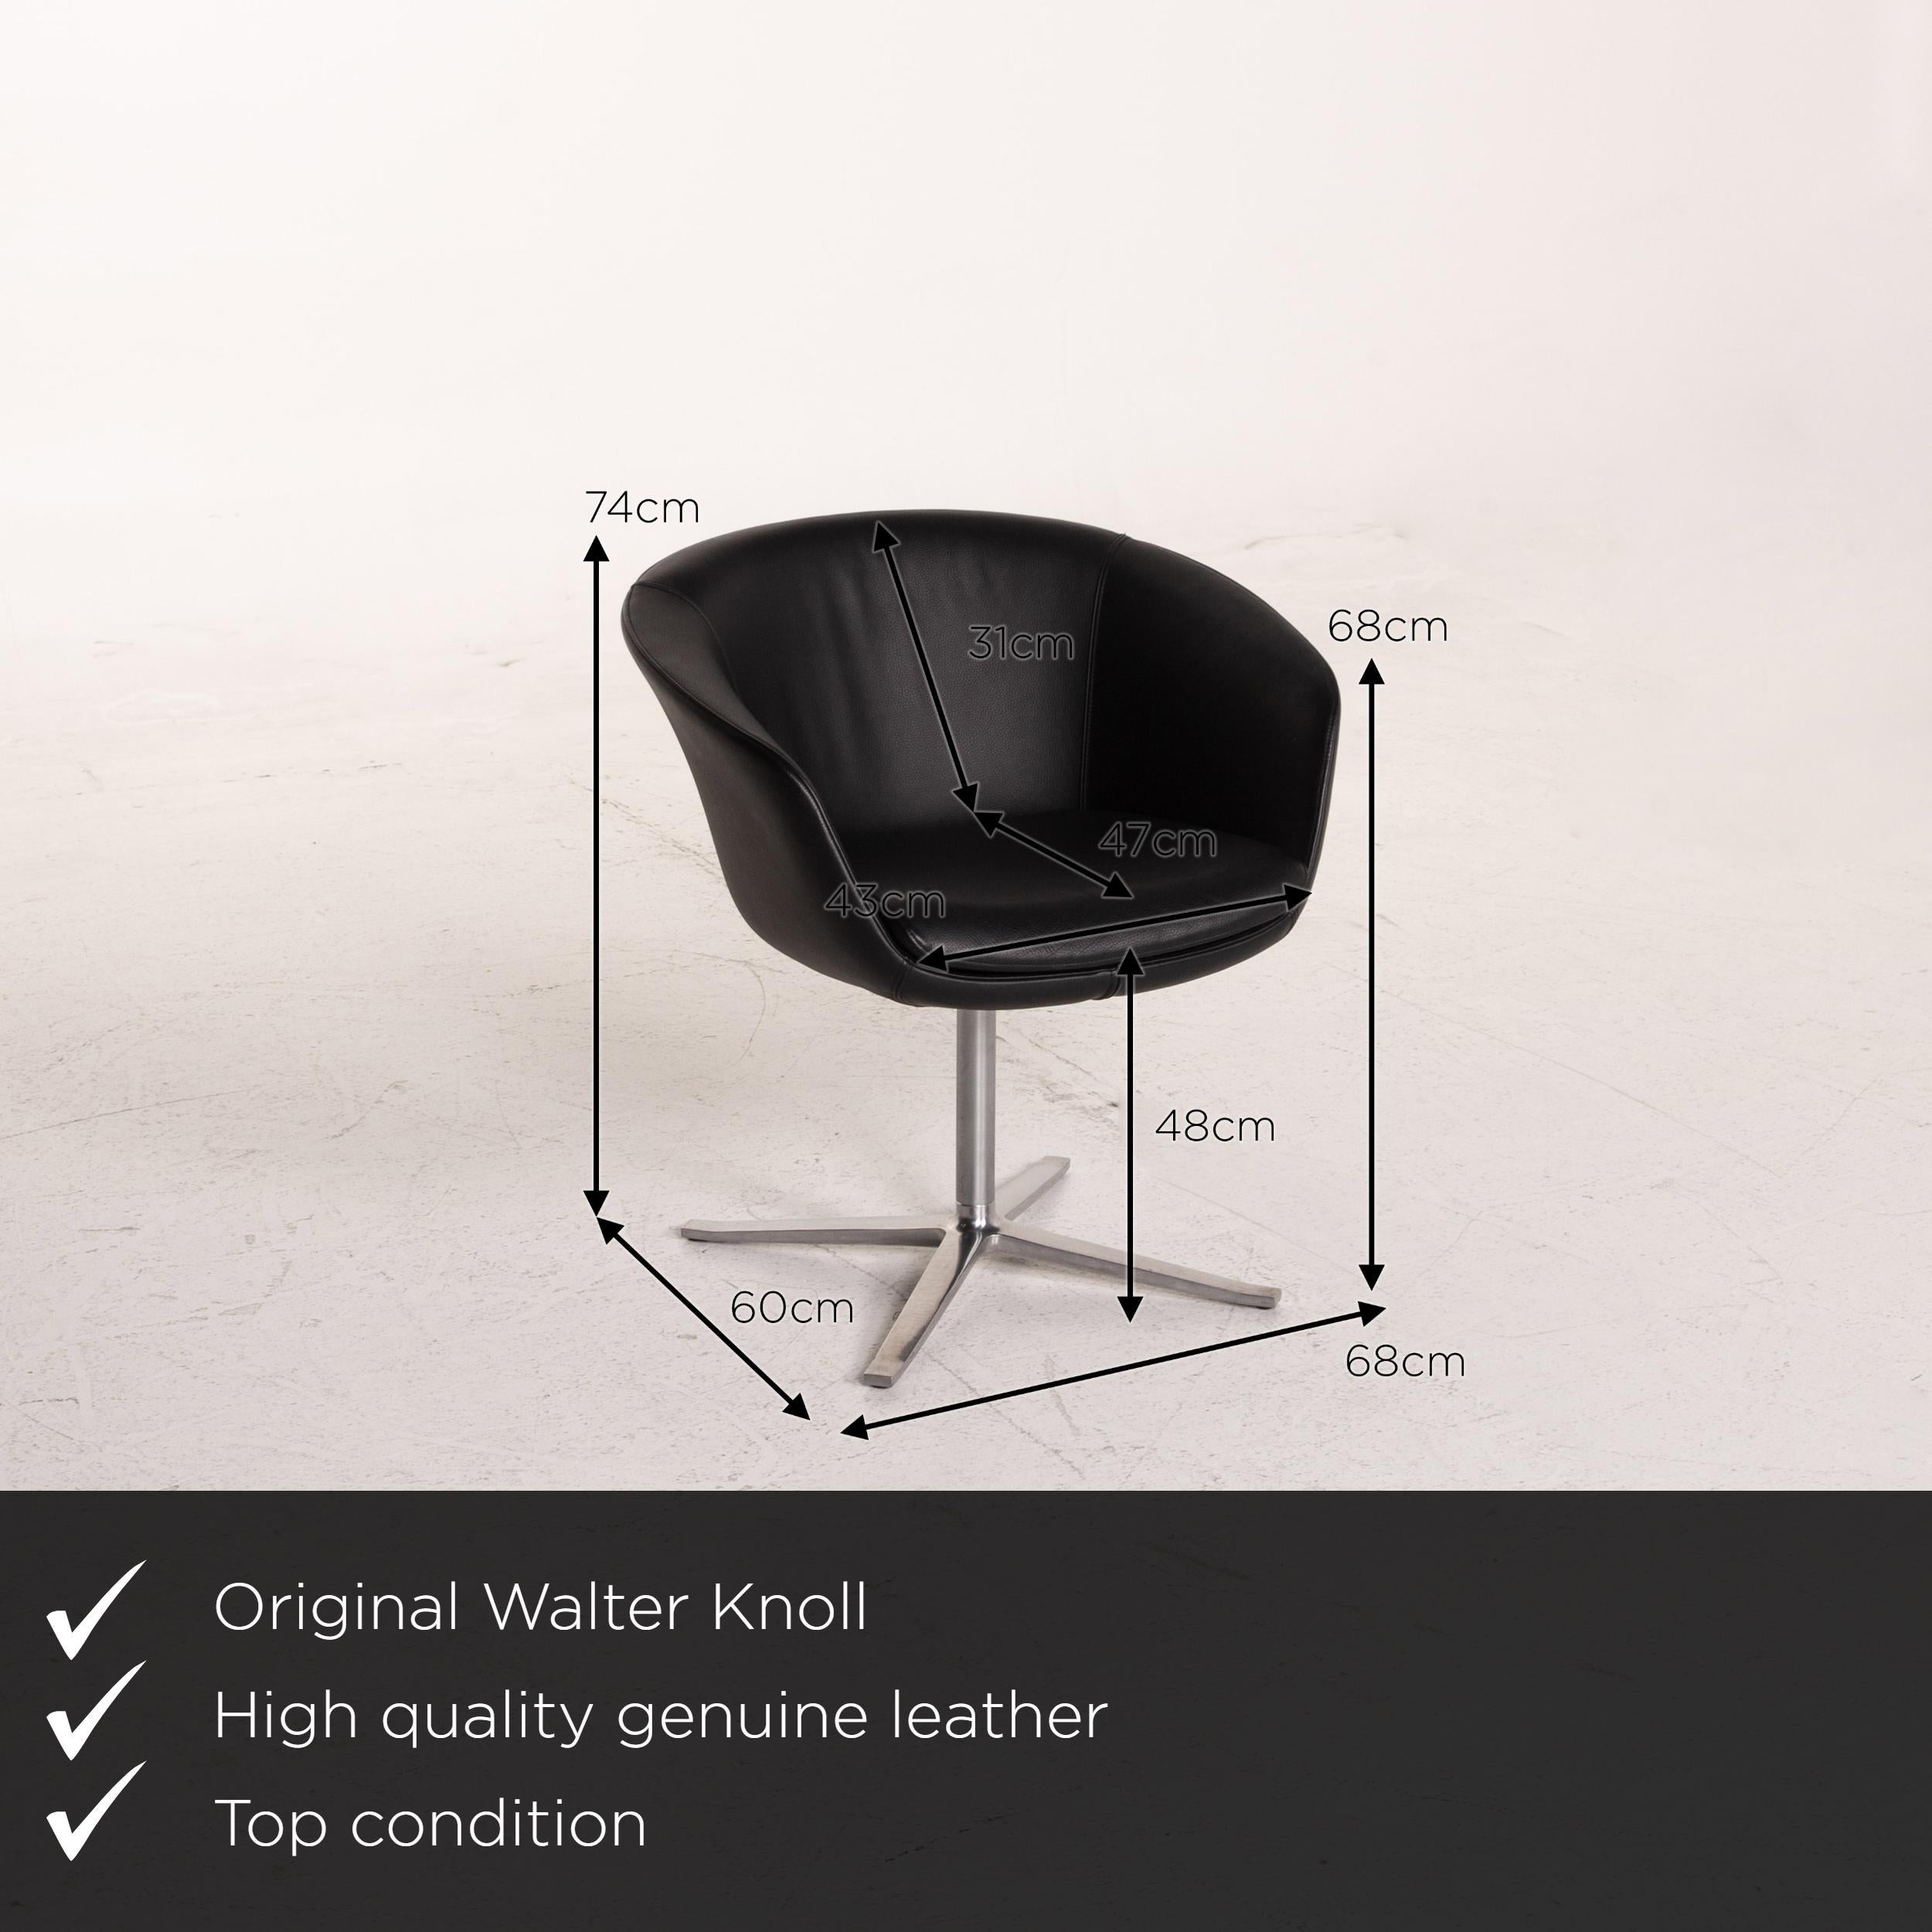 We present to you a Walter Knoll leather armchair black chair.
    
 

 Product measurements in centimeters:
 

Depth 60
Width 68
Height 74
Seat height 48
Rest height 68
Seat depth 47
Seat width 43
Back height 31.
  